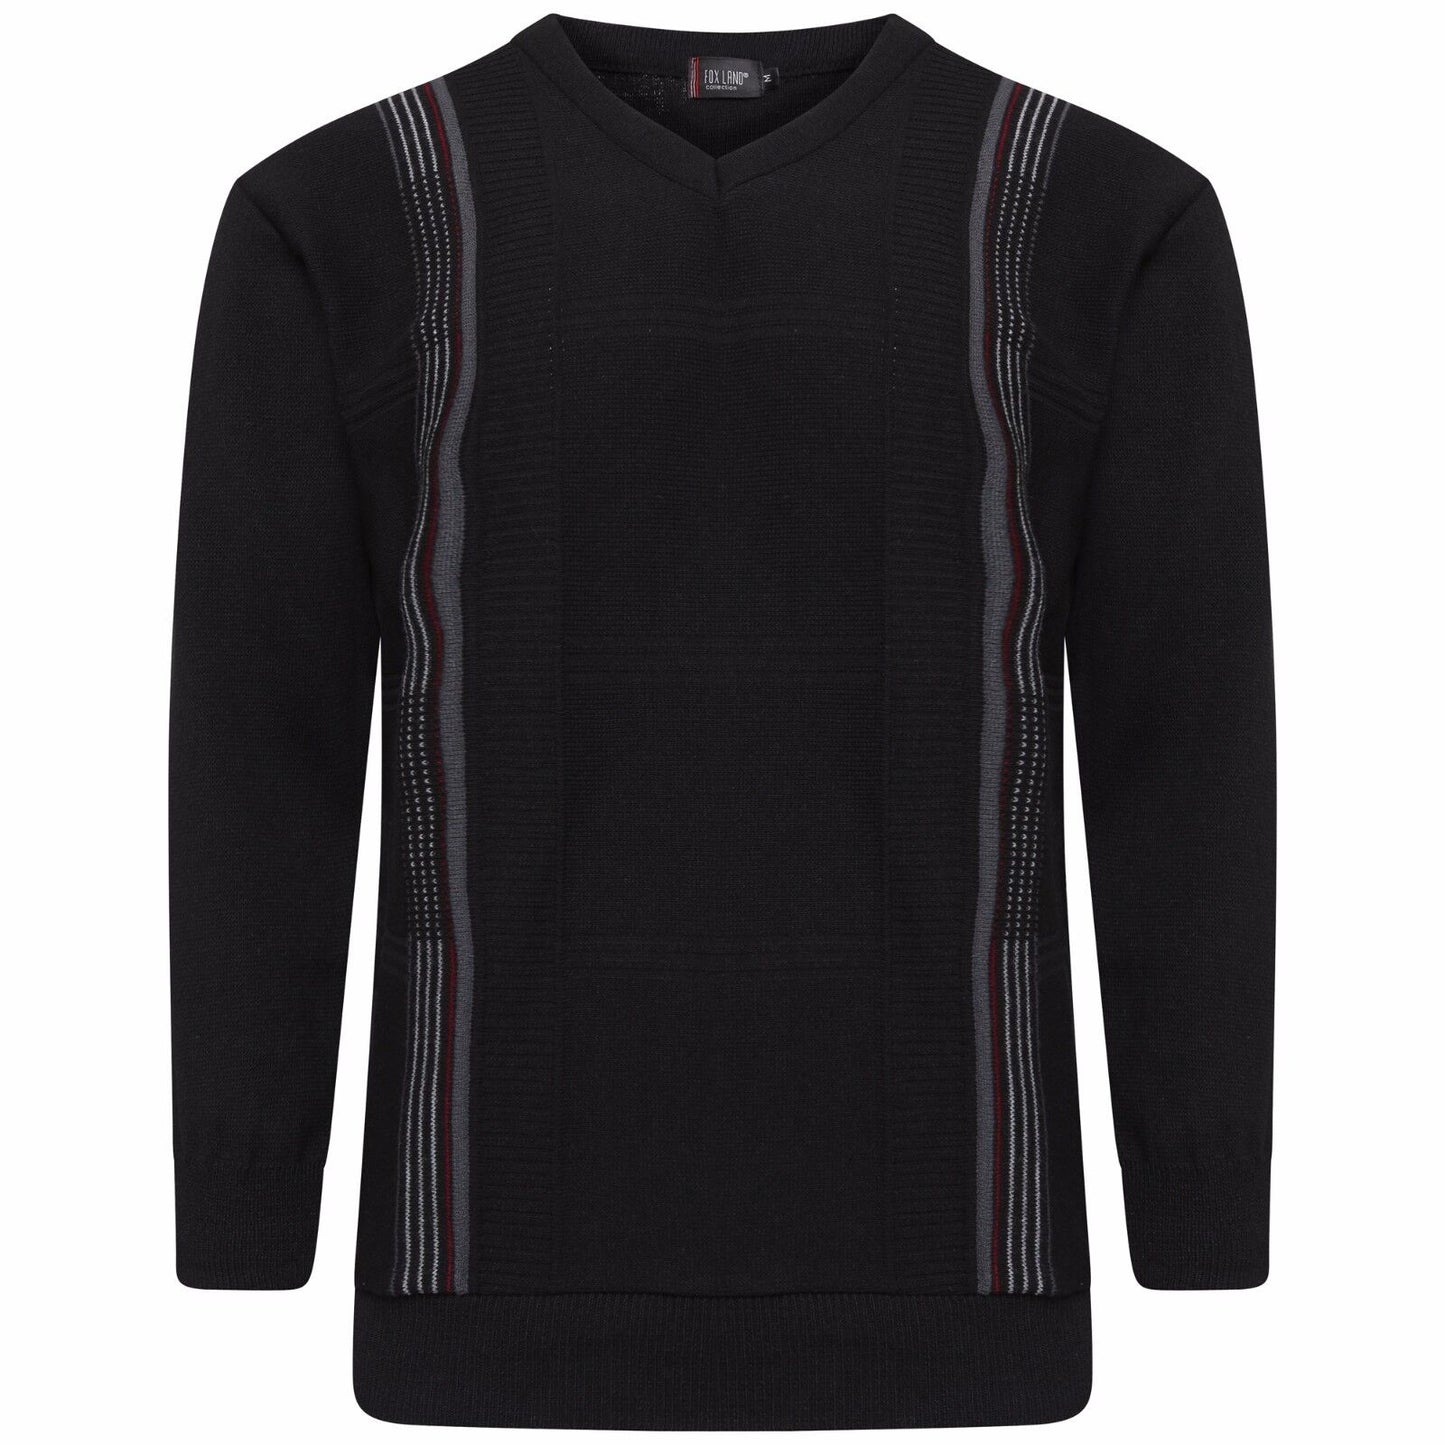 MENS V NECK STRIPE JUMPER LONG SLEEVE KNITWEAR SWEATER PULLOVER SOFT KNITTED TOP